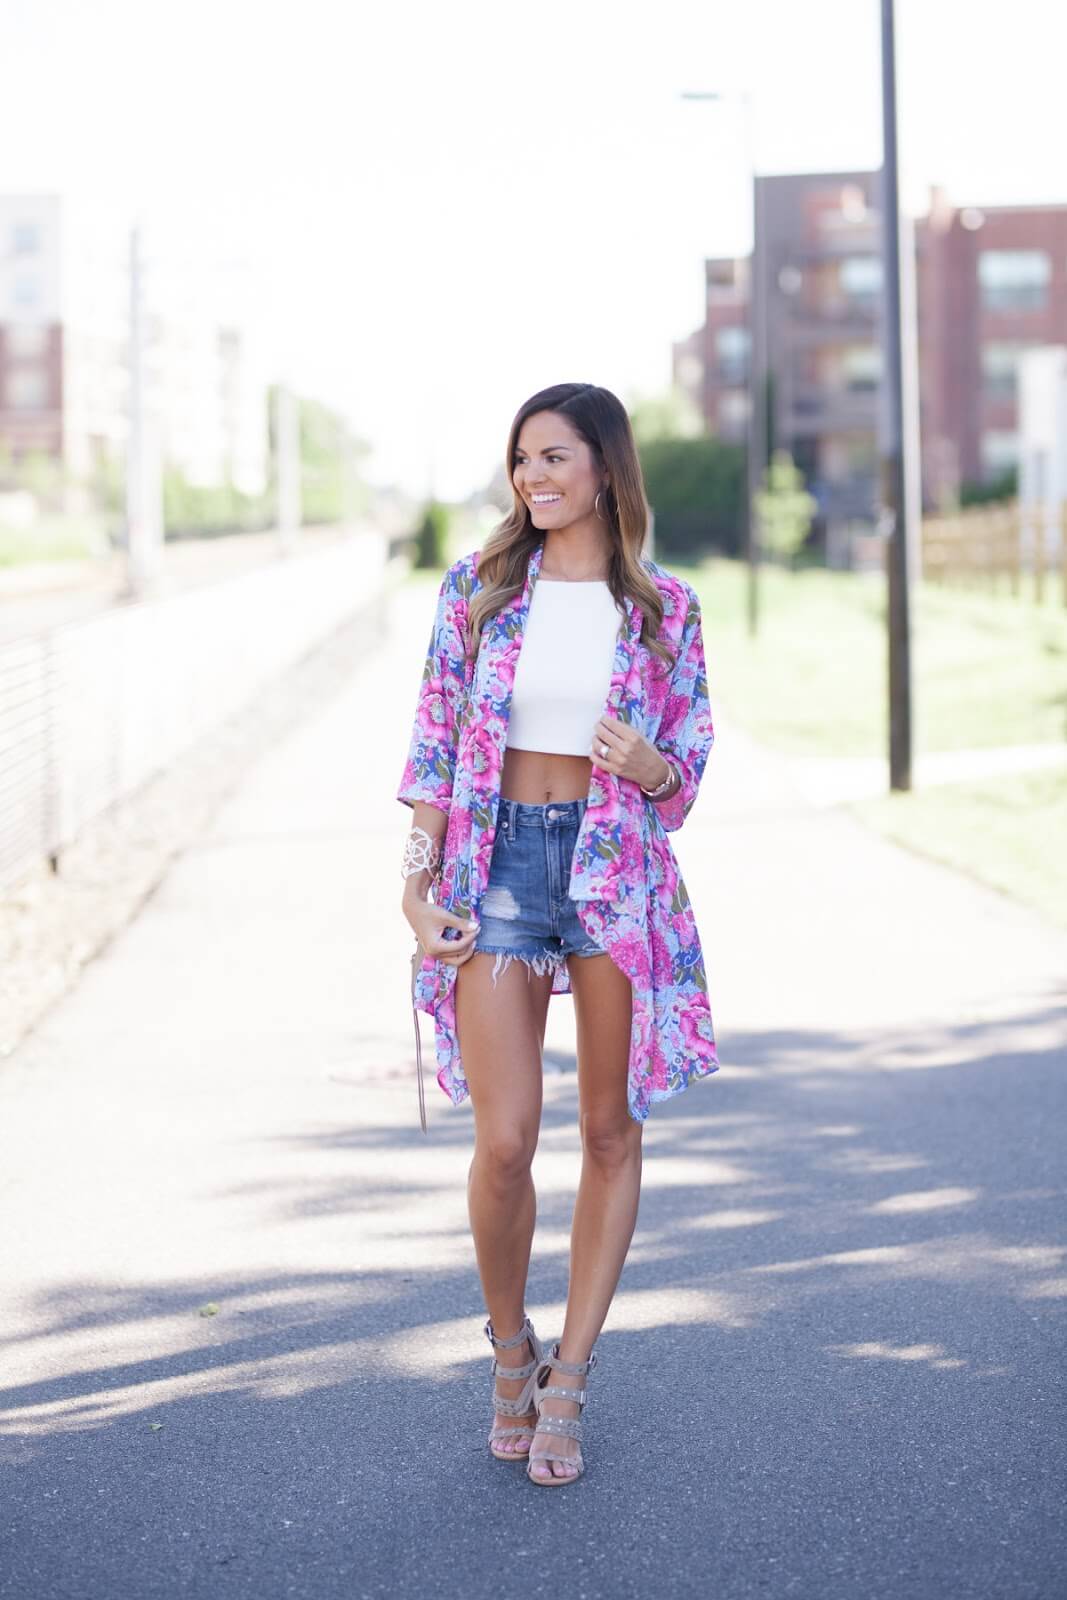 woman with white crop top and kimono wearing denim shorts